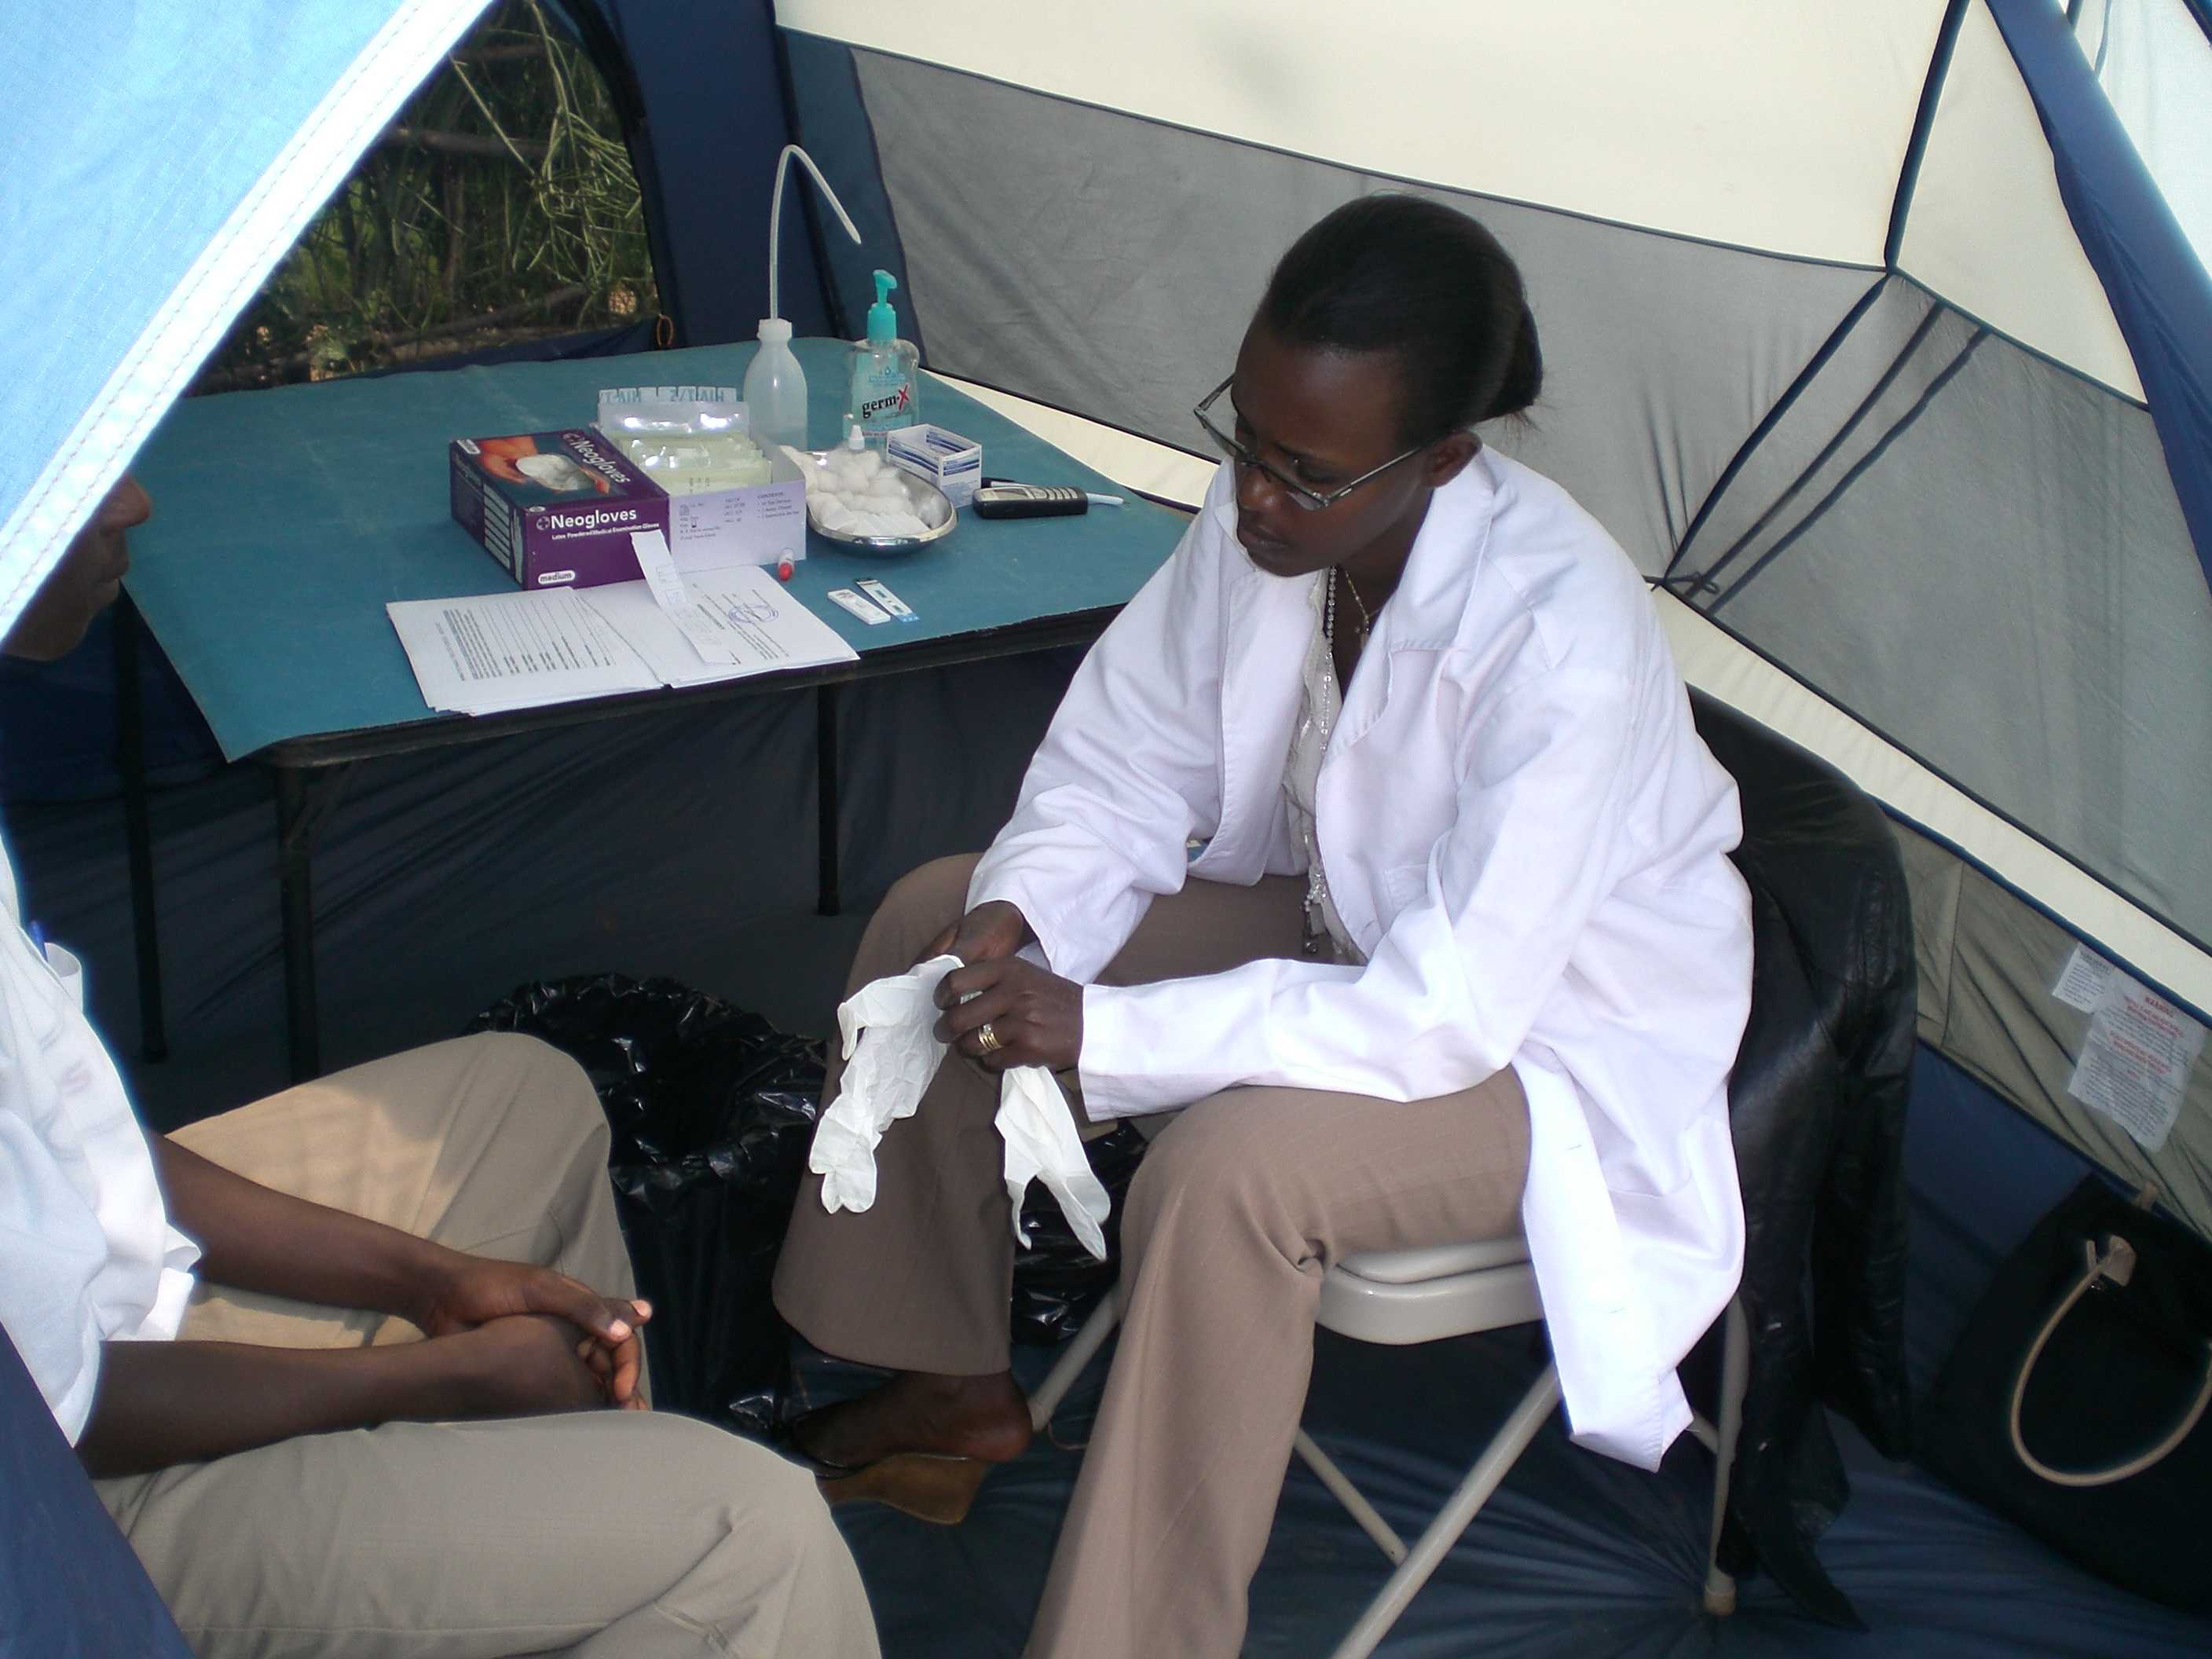 CDC staffer preparing to give an HIV test using the finger prick method in a mobile VCT unit